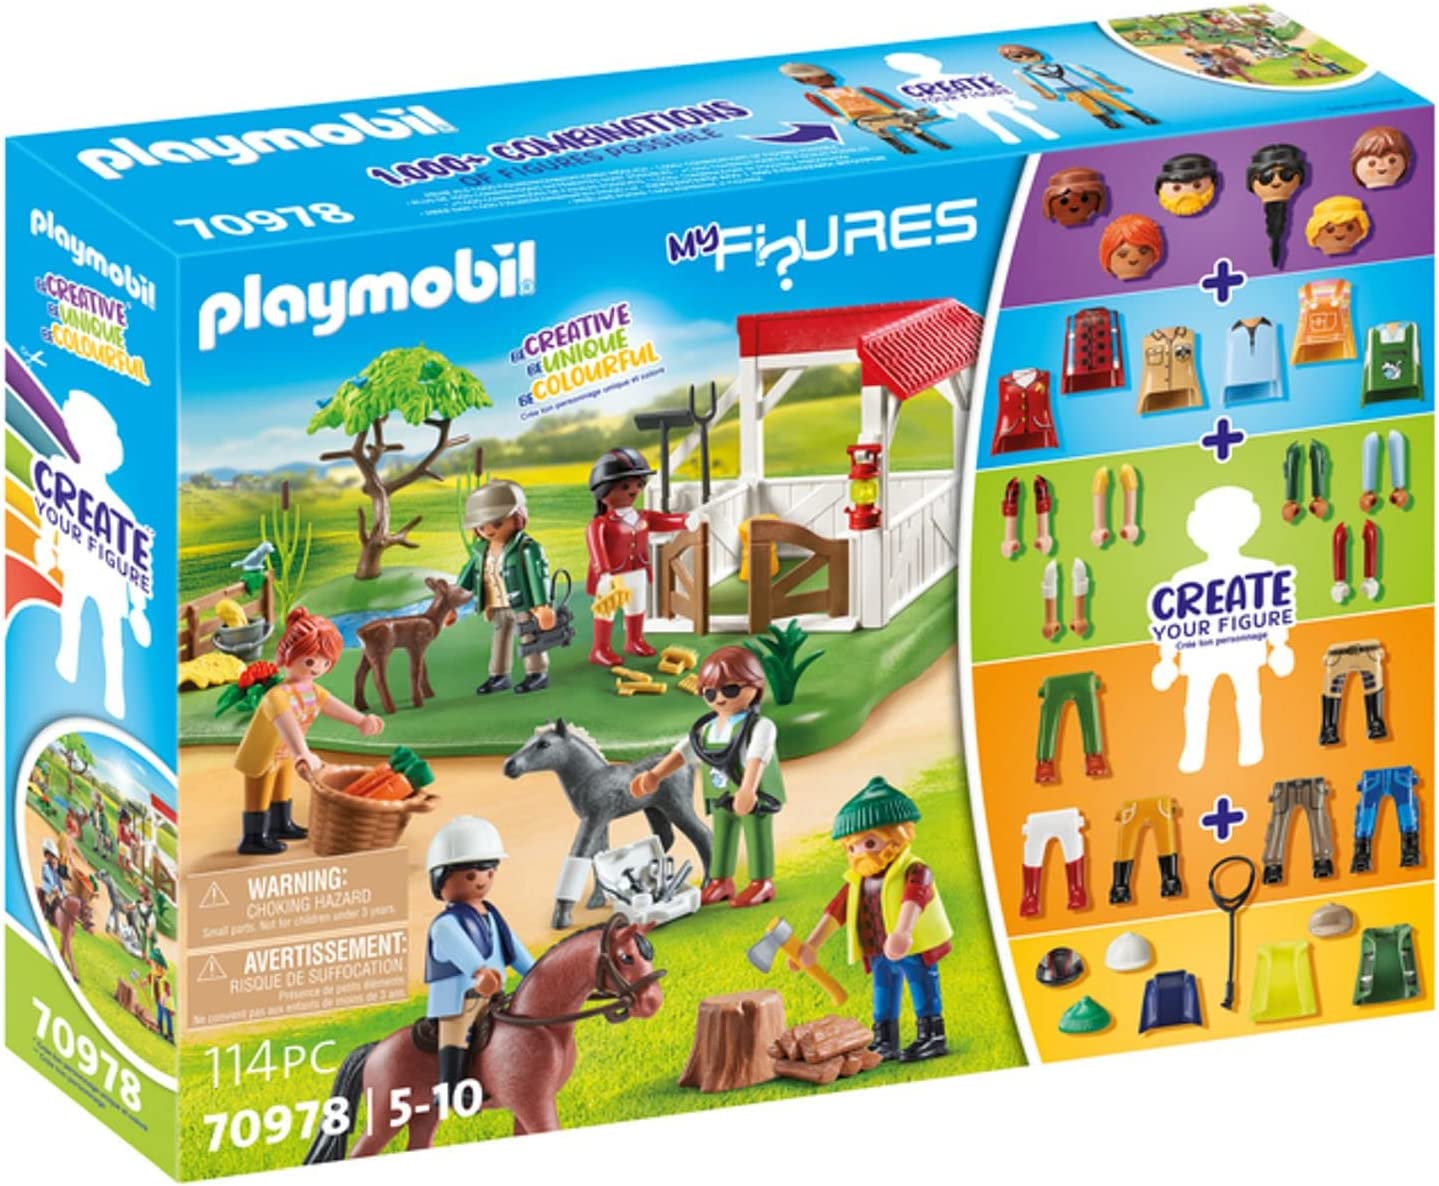 PLAYMOBIL My Figures 70978 Horse Ranch 6 Toy Figures with Over 1000 Combination Options, Horse Toy for Children from 5 Years